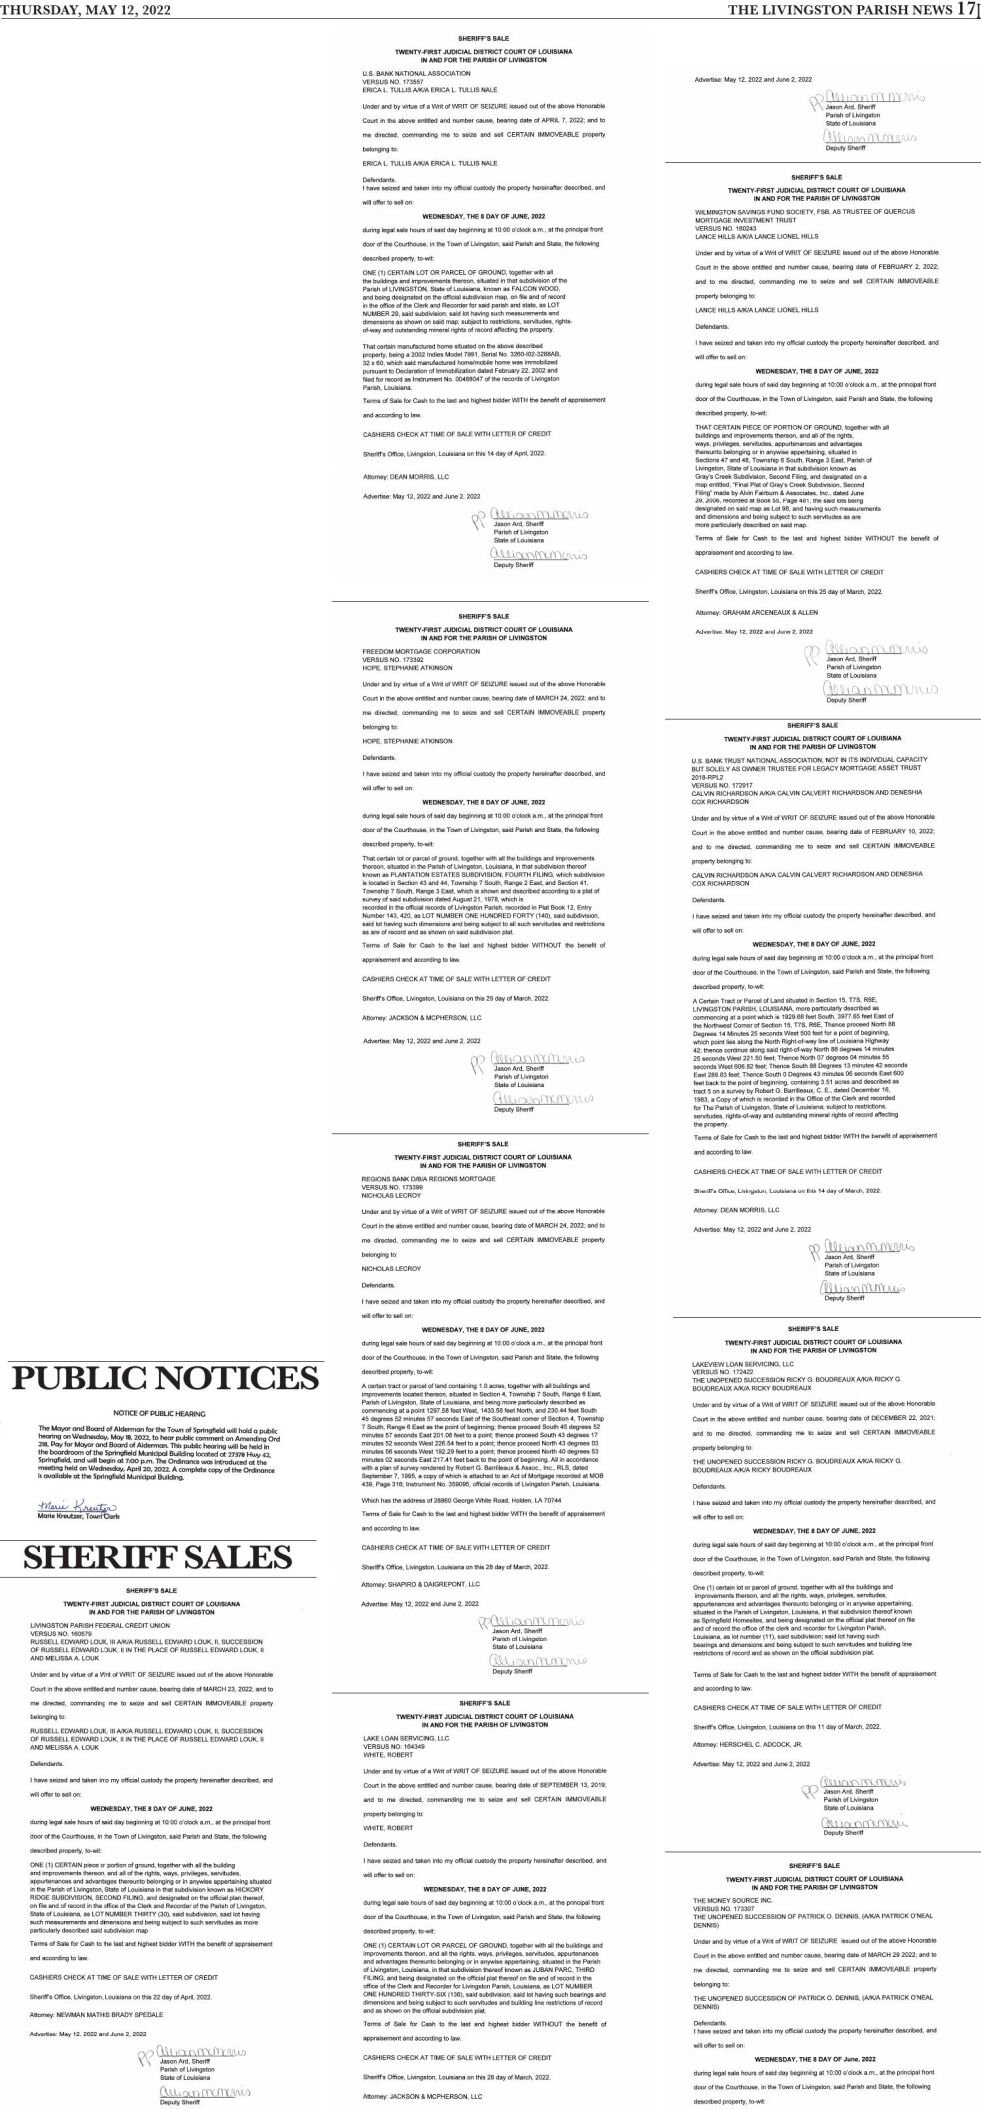 Public Notices published May 12, 2022